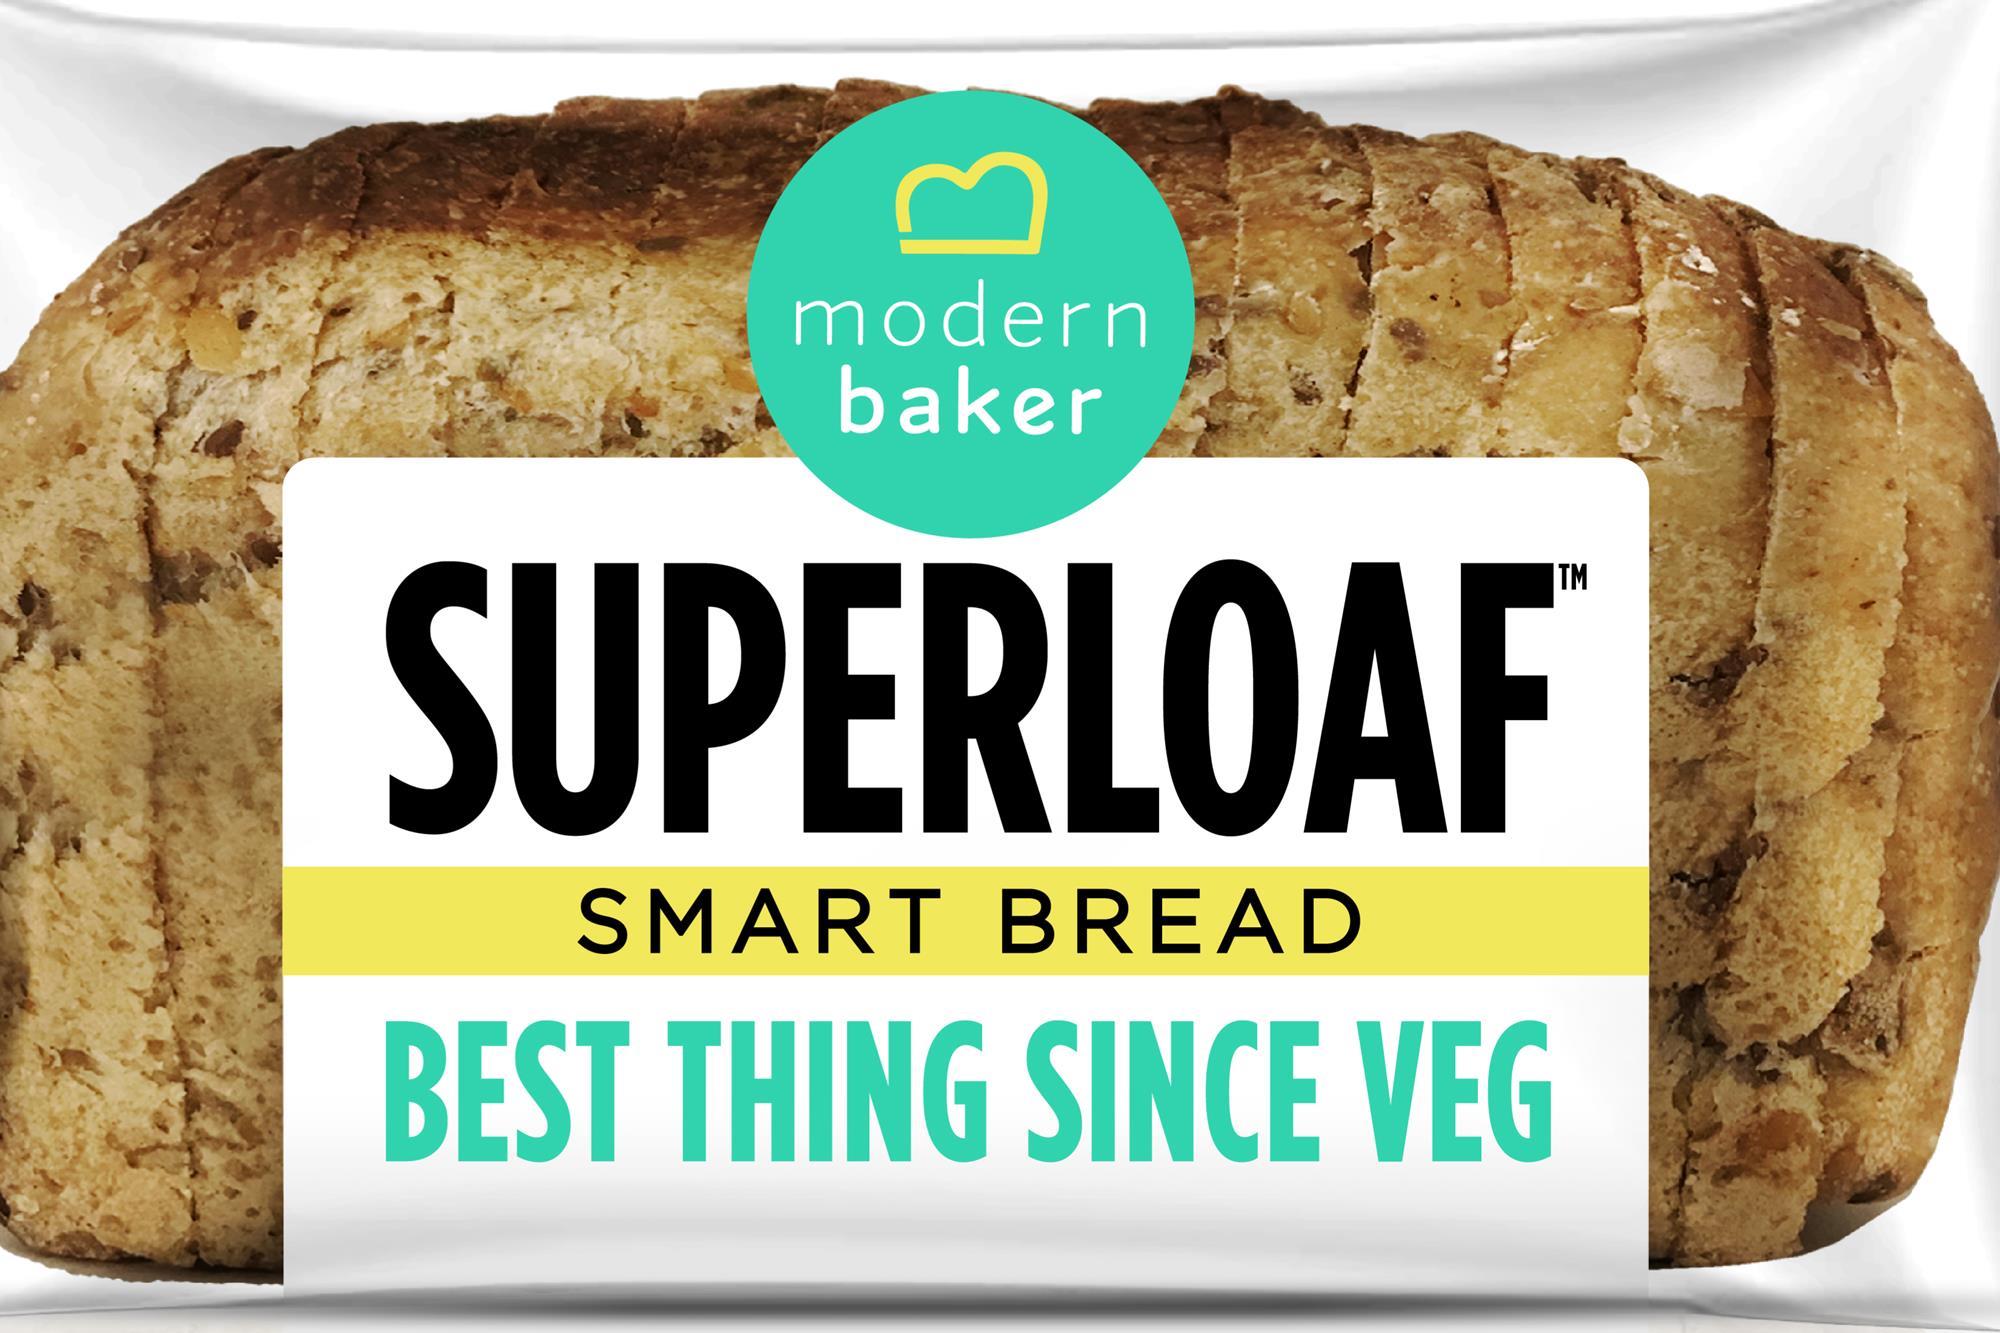 Superloaf: 10 facts about Modern Baker's new 'smart bread', Analysis and  Features